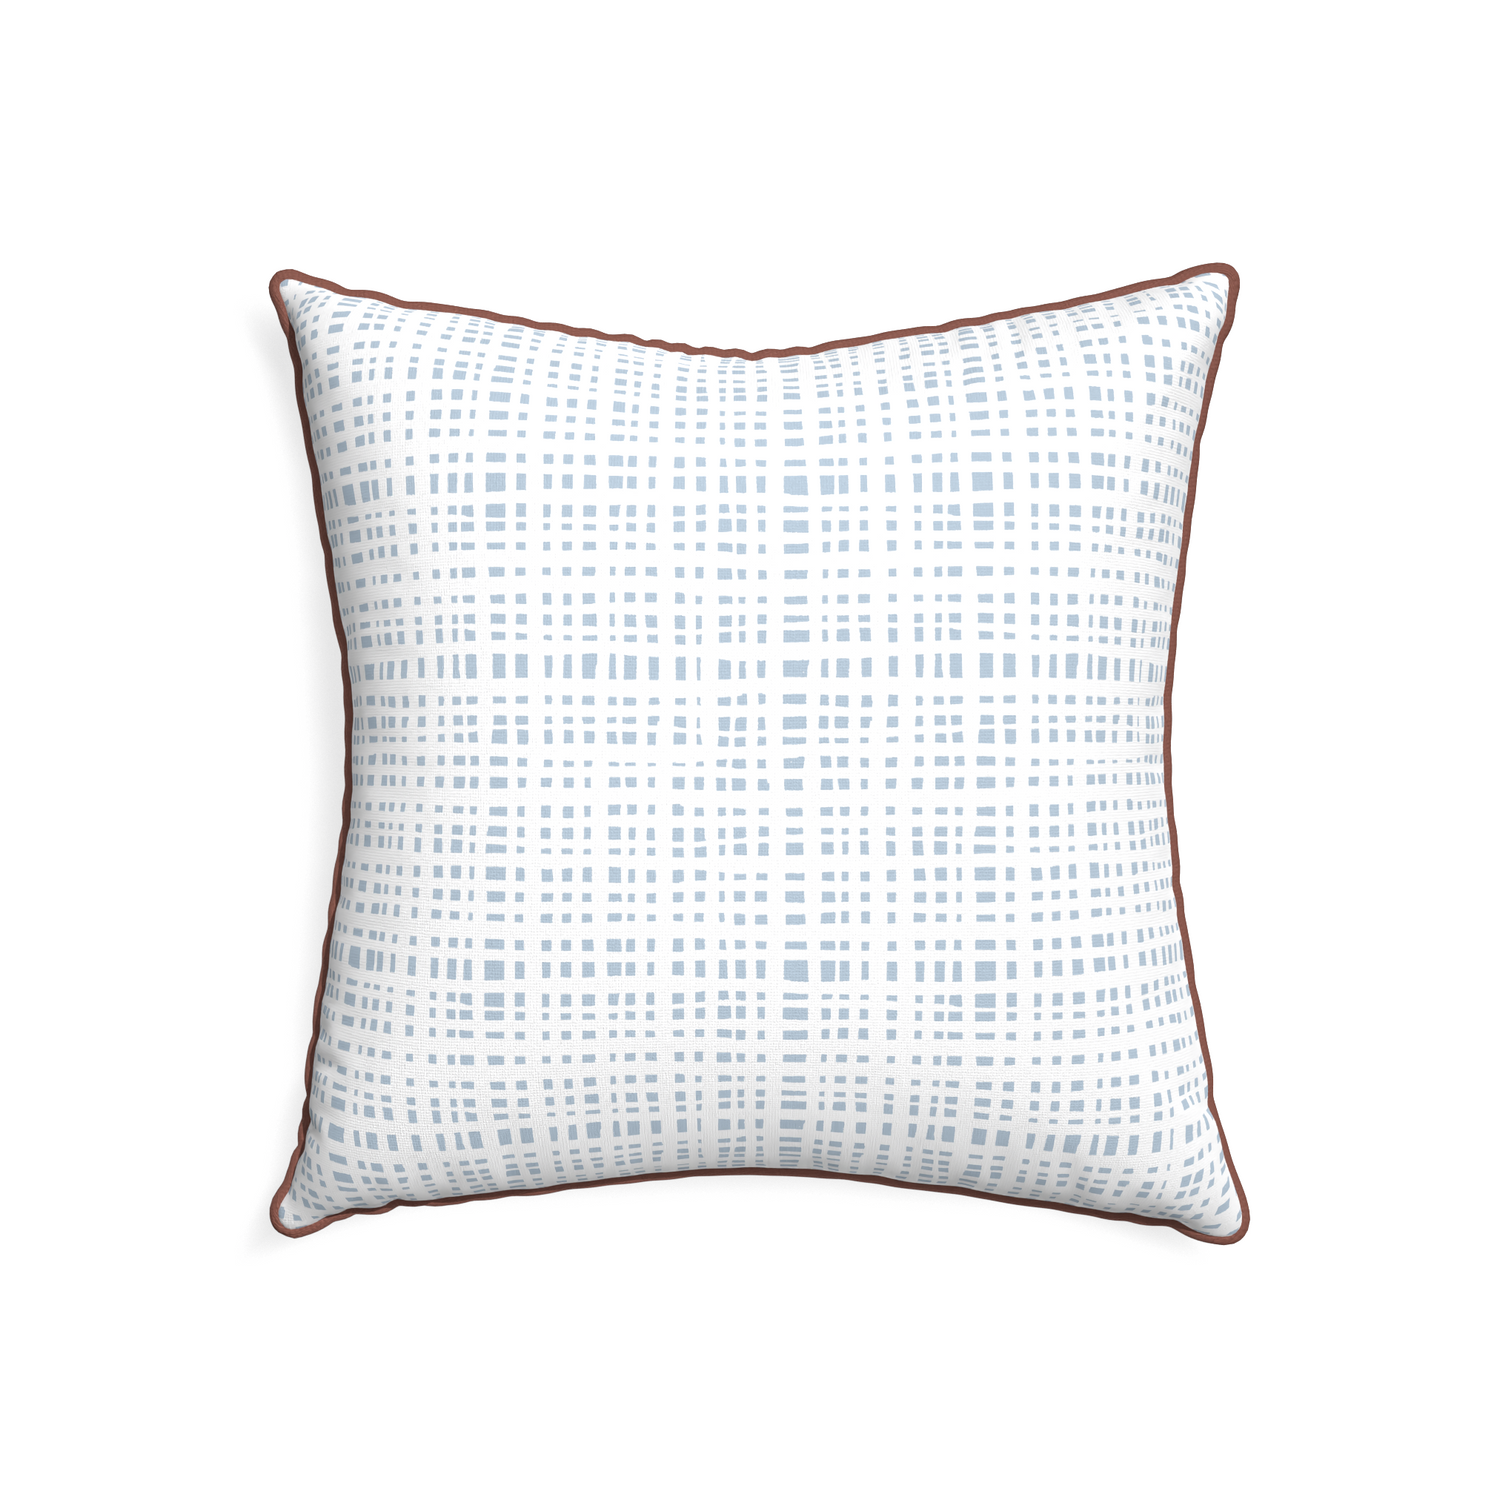 22-square ginger sky custom pillow with w piping on white background